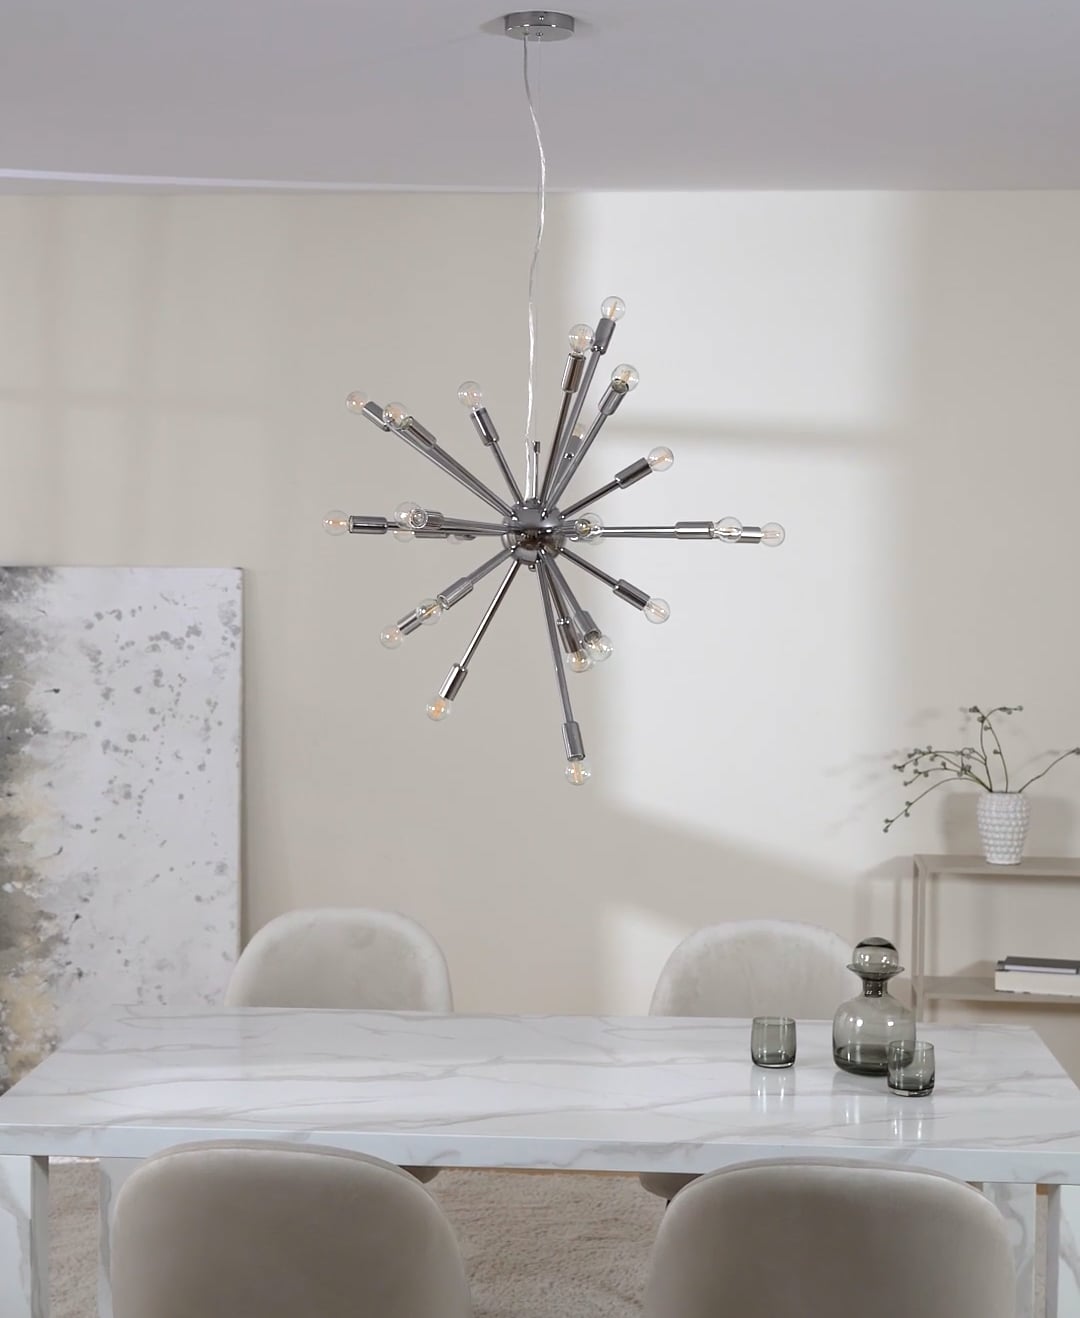 Grote hanglamp | Westwing